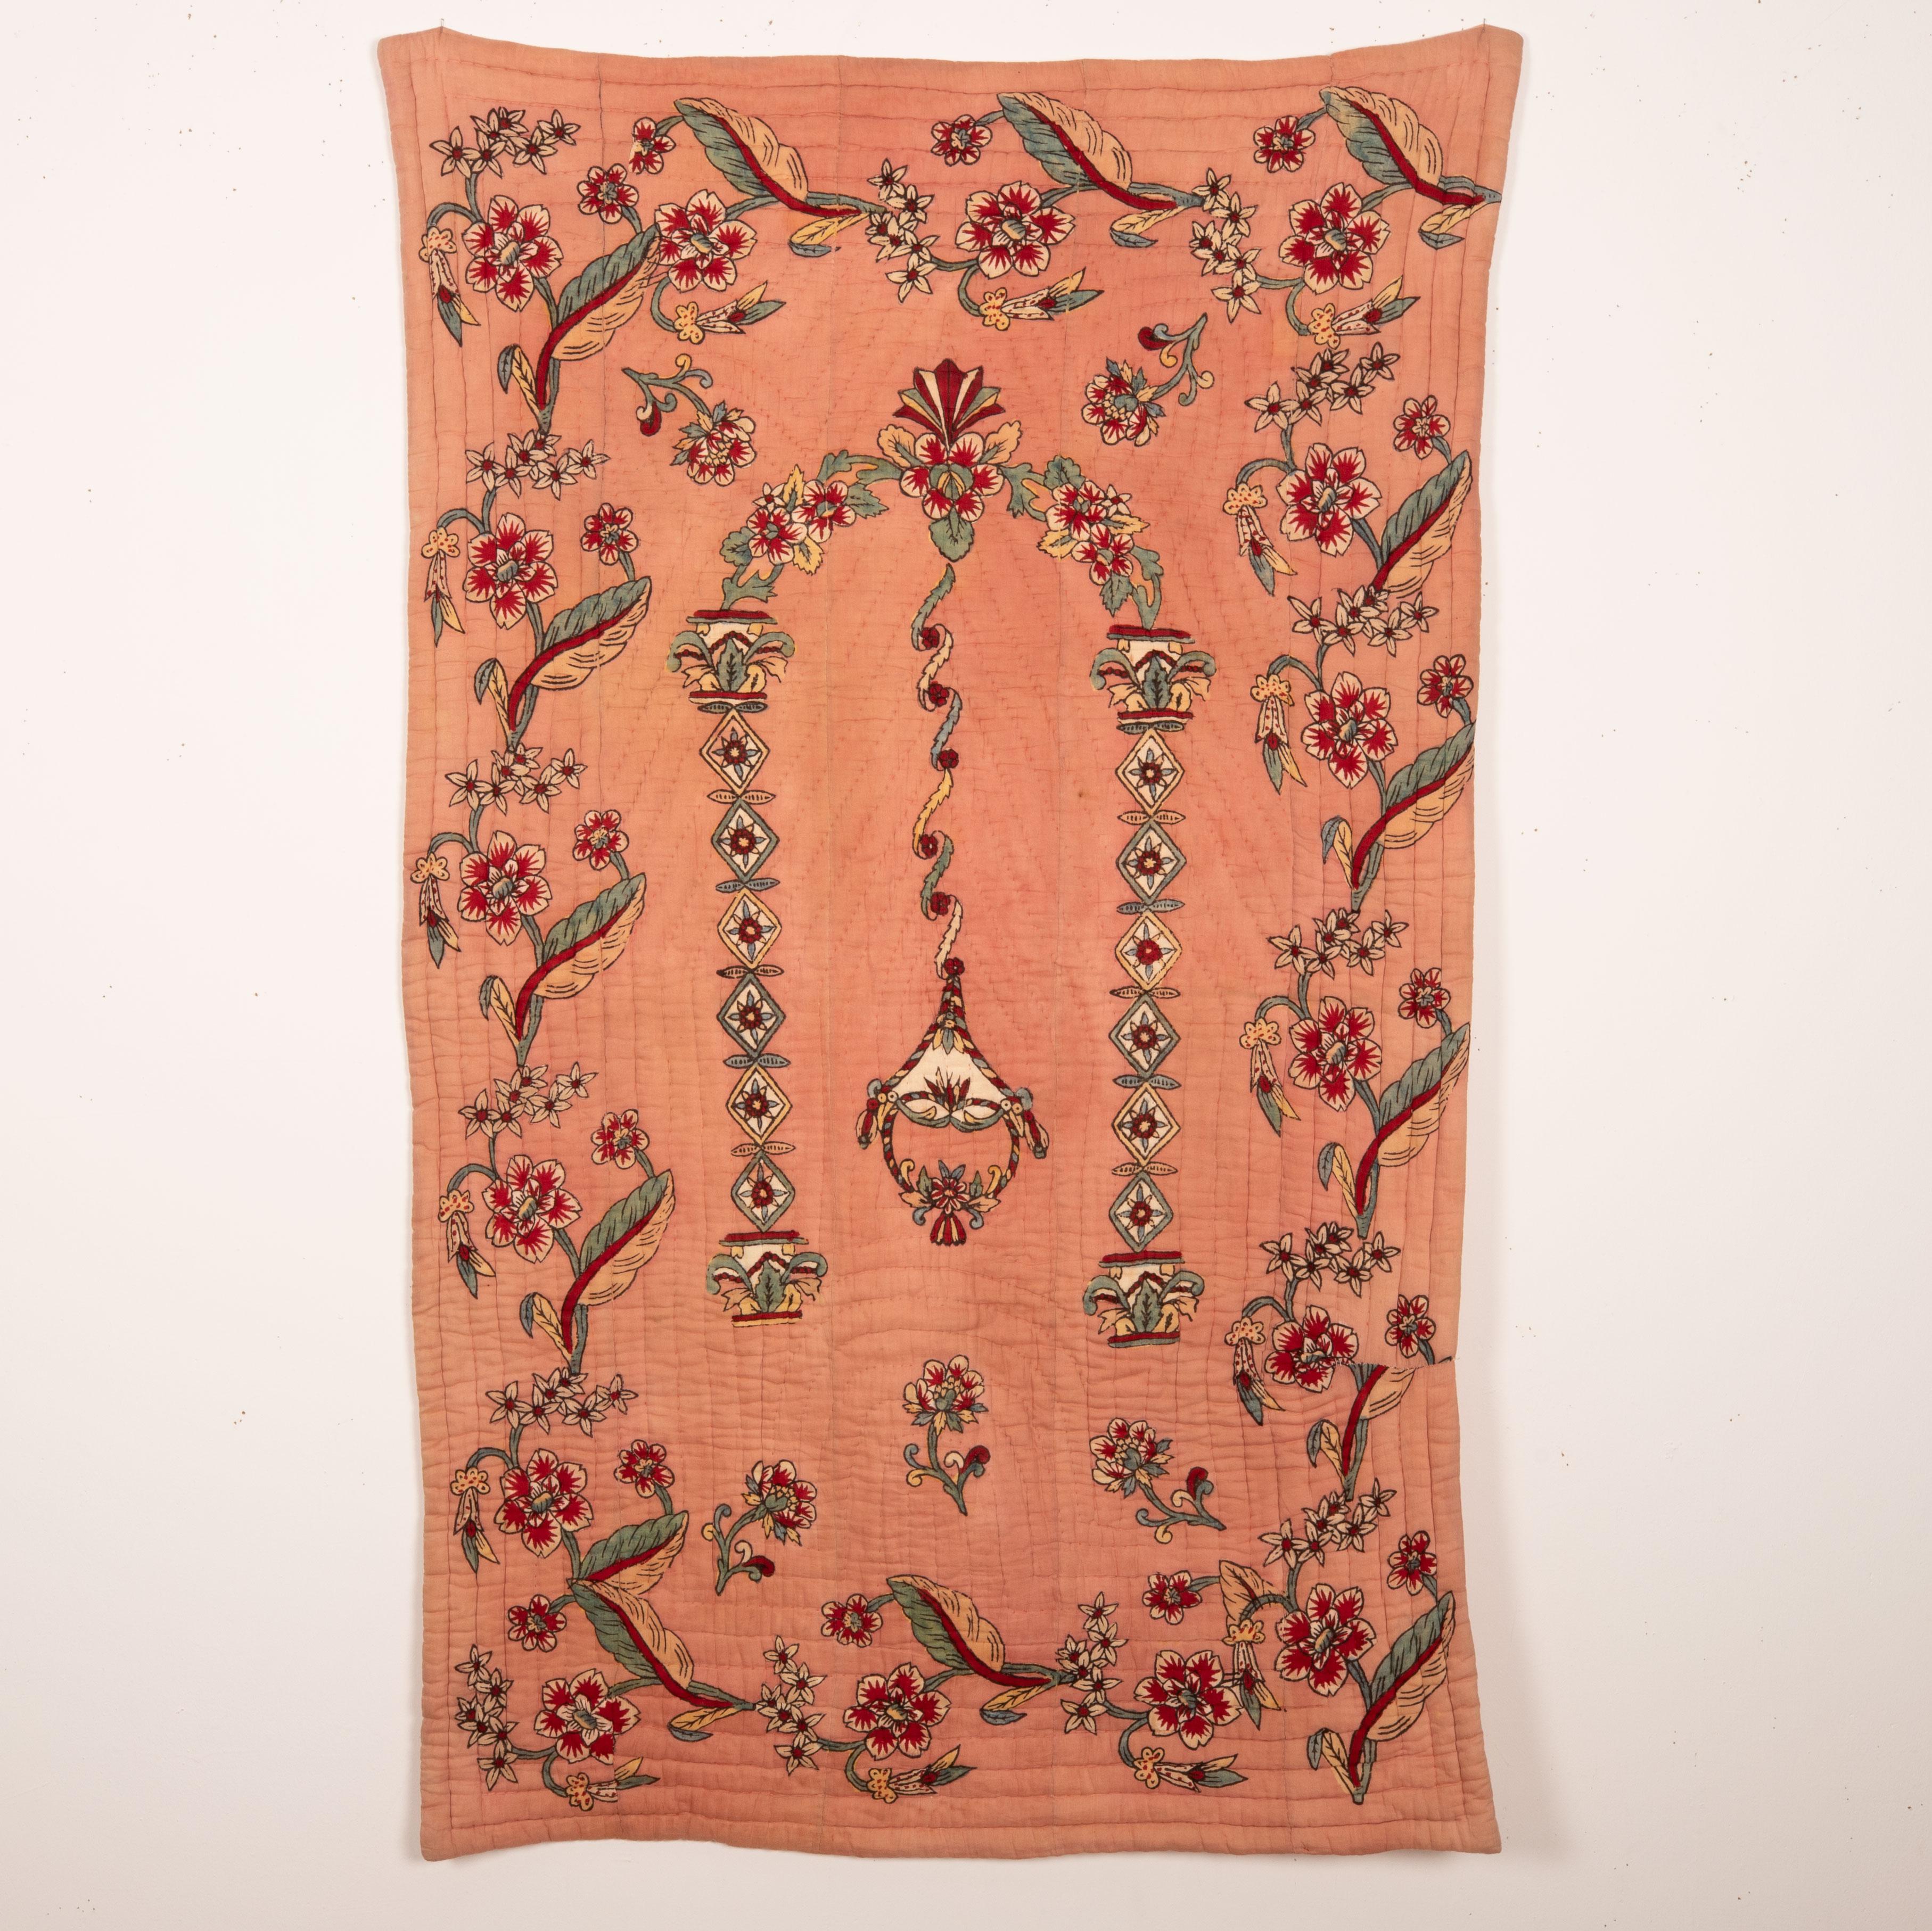 Hand block printing is one of the land marks of Western Anatolian material culture. These quilts have been used either as prayer mats of wall hangings.

